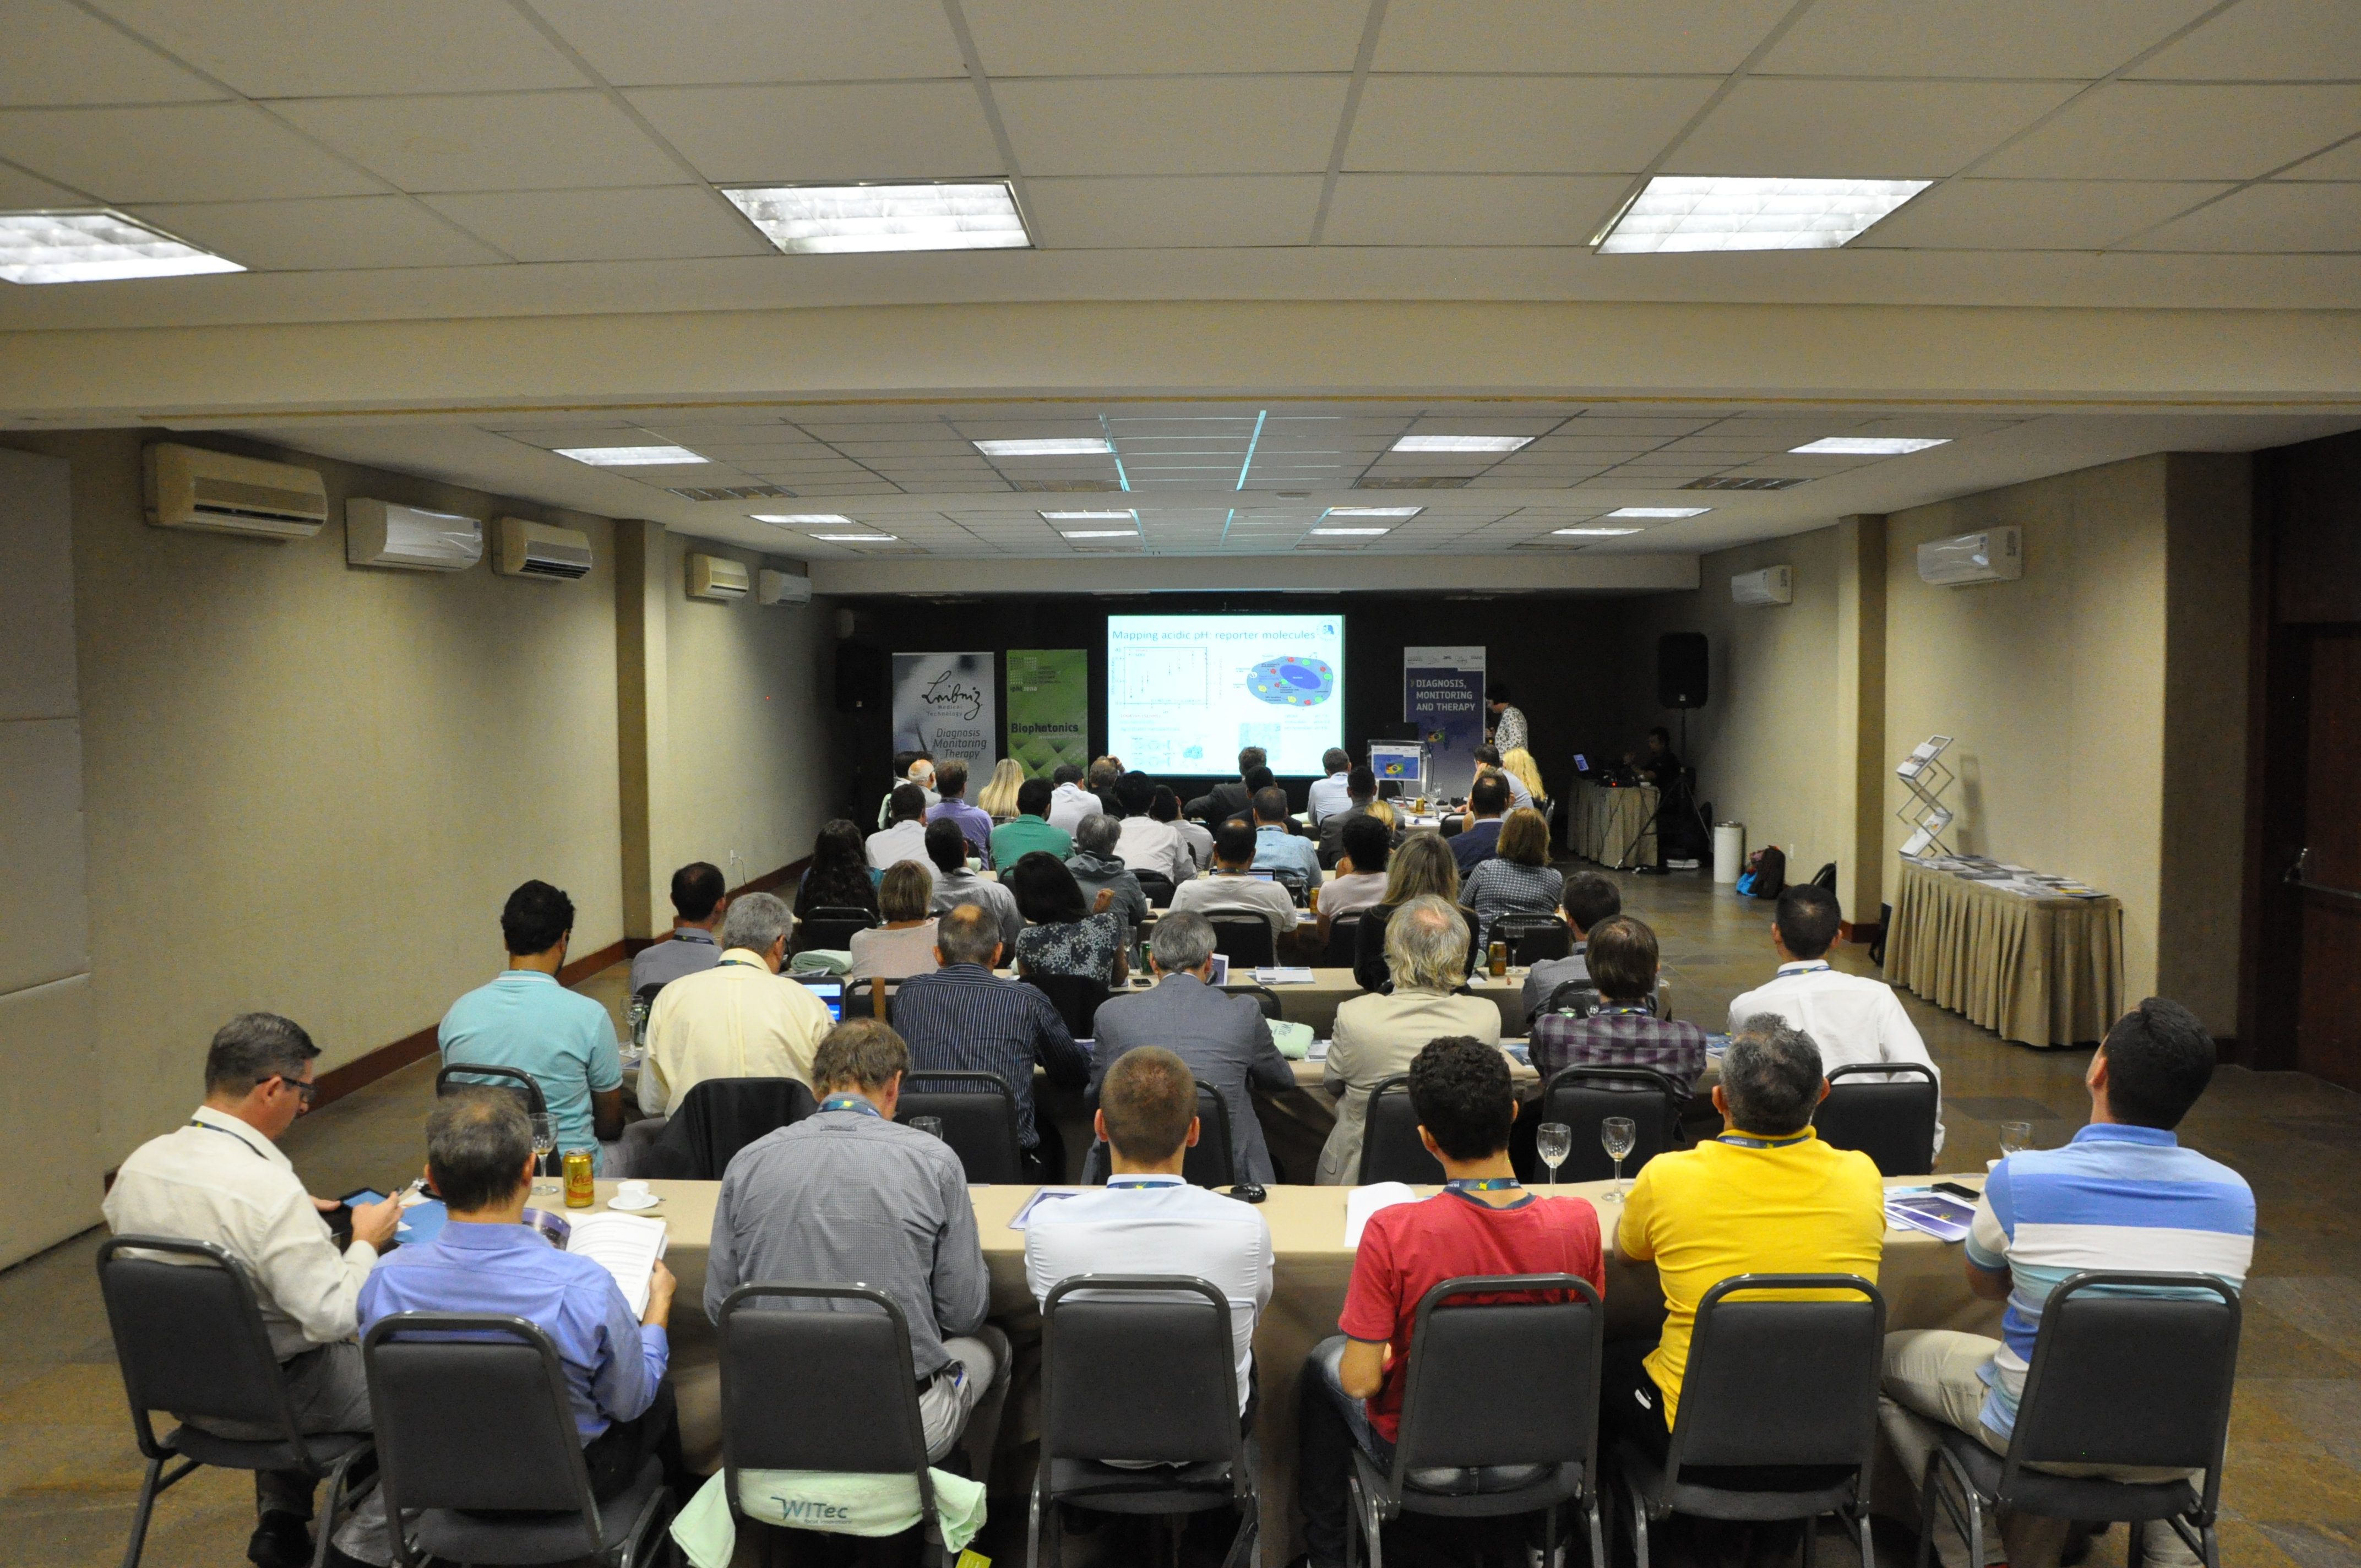 The audience listens with interest to the presentations during the German-Brazilian workshop